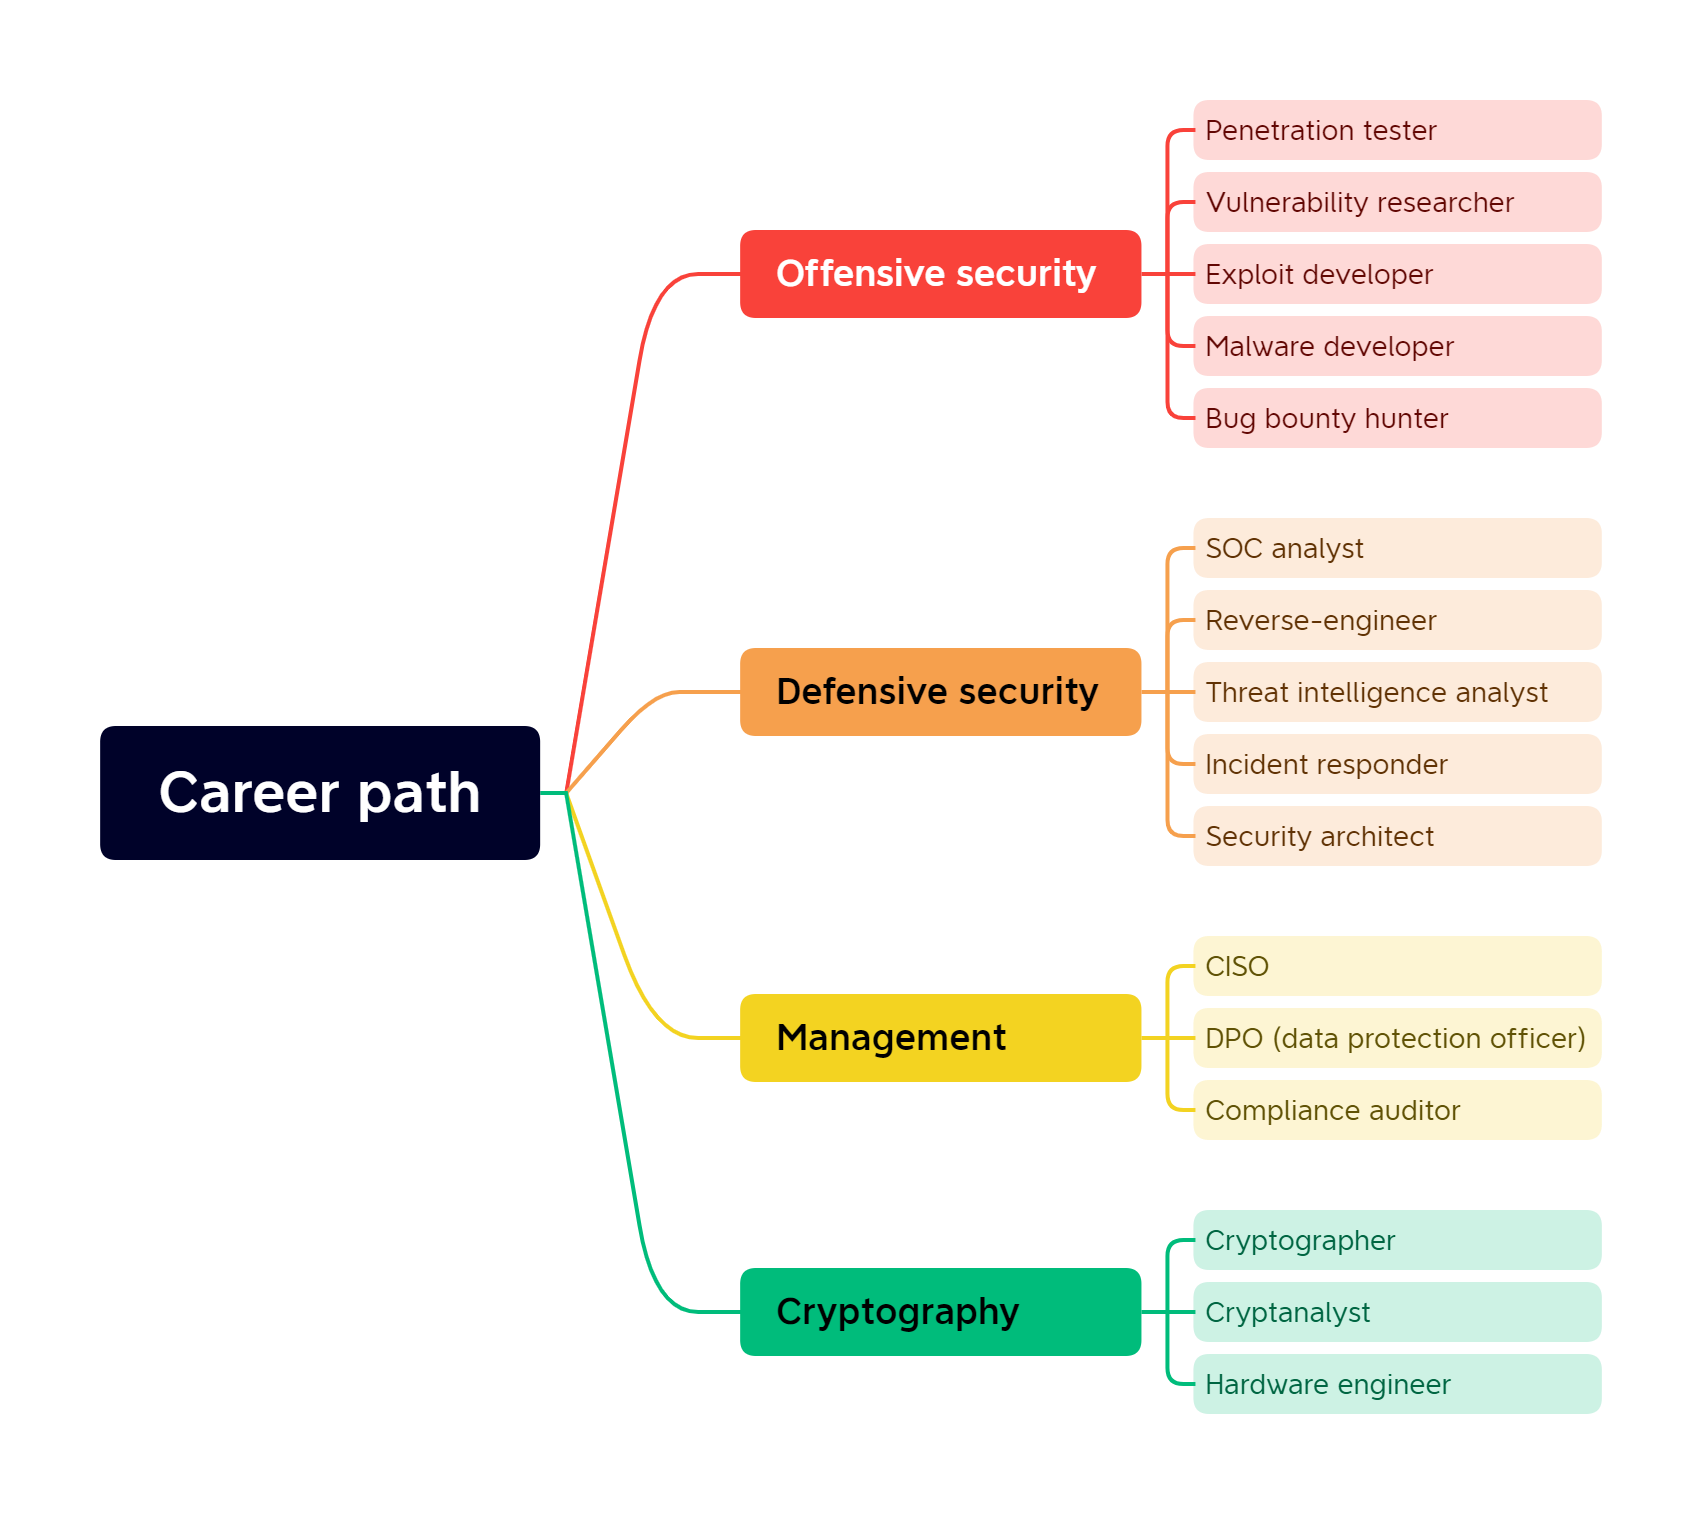 Mind map of possible carreer paths in cybersecurity: offensive, defensive, management, cryptography...